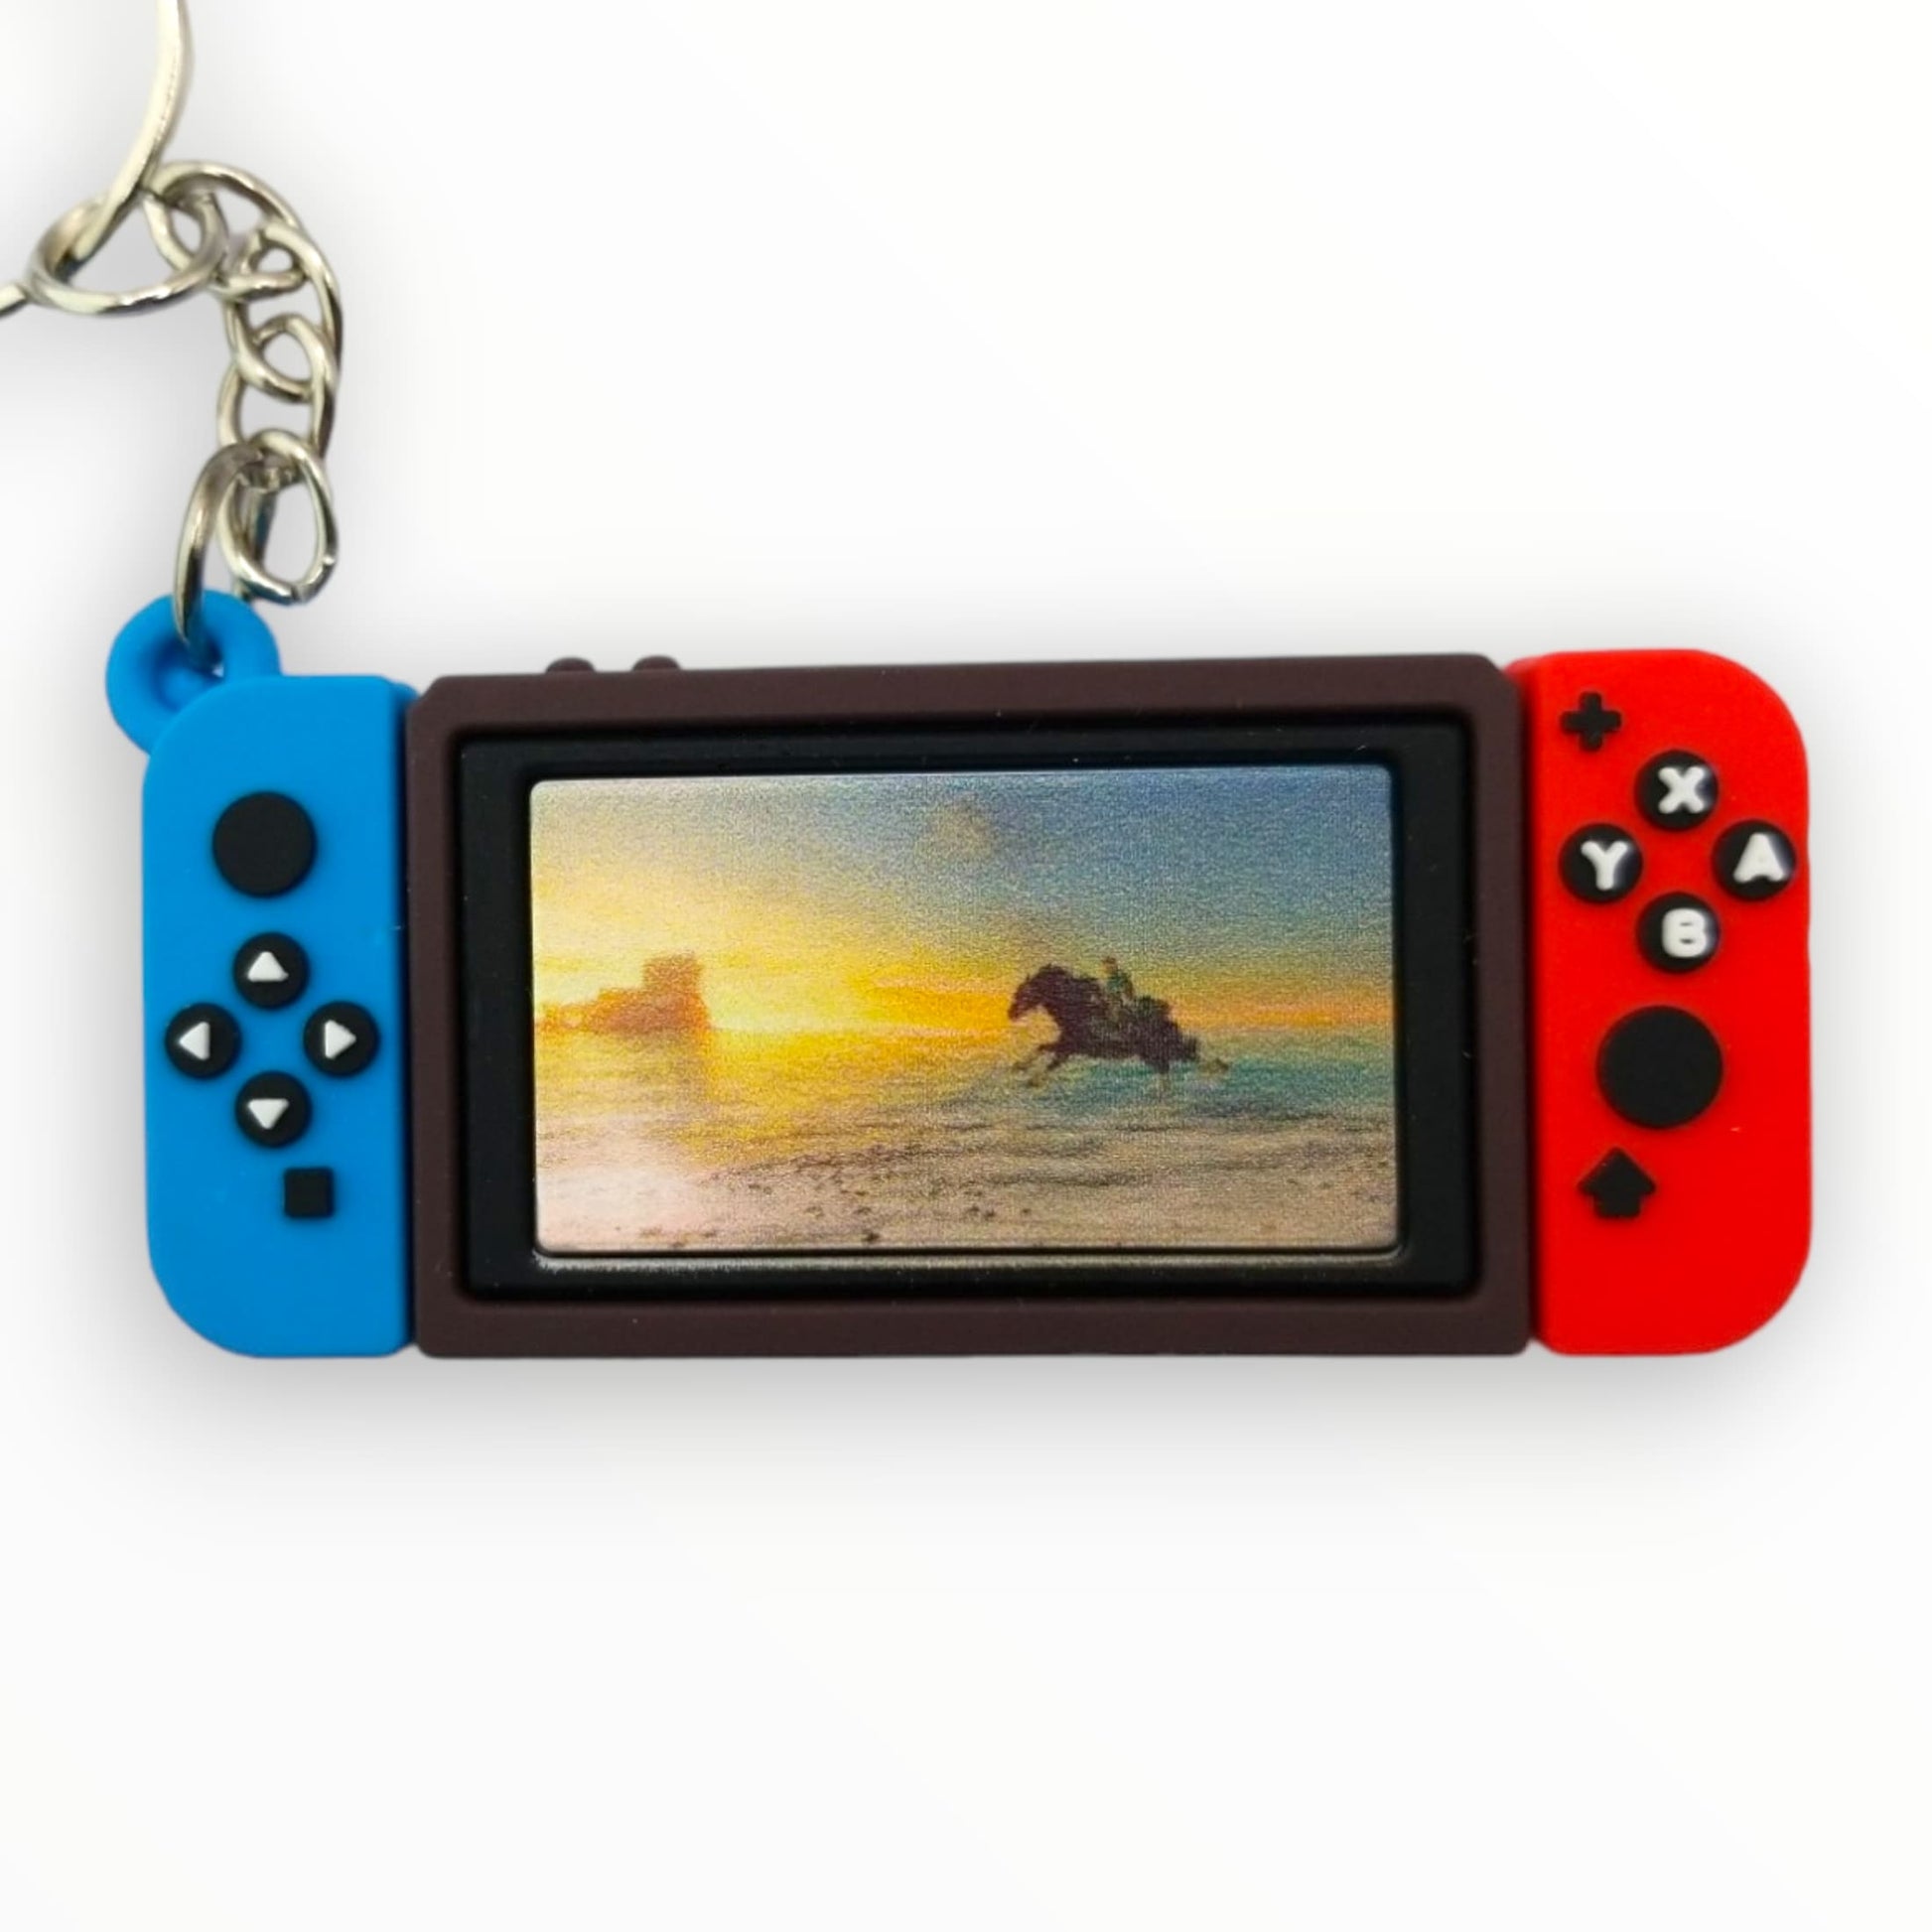 Nintendo Switch Legend of Zelda Controller Replica Keychain from Confetti Kitty, Only 10